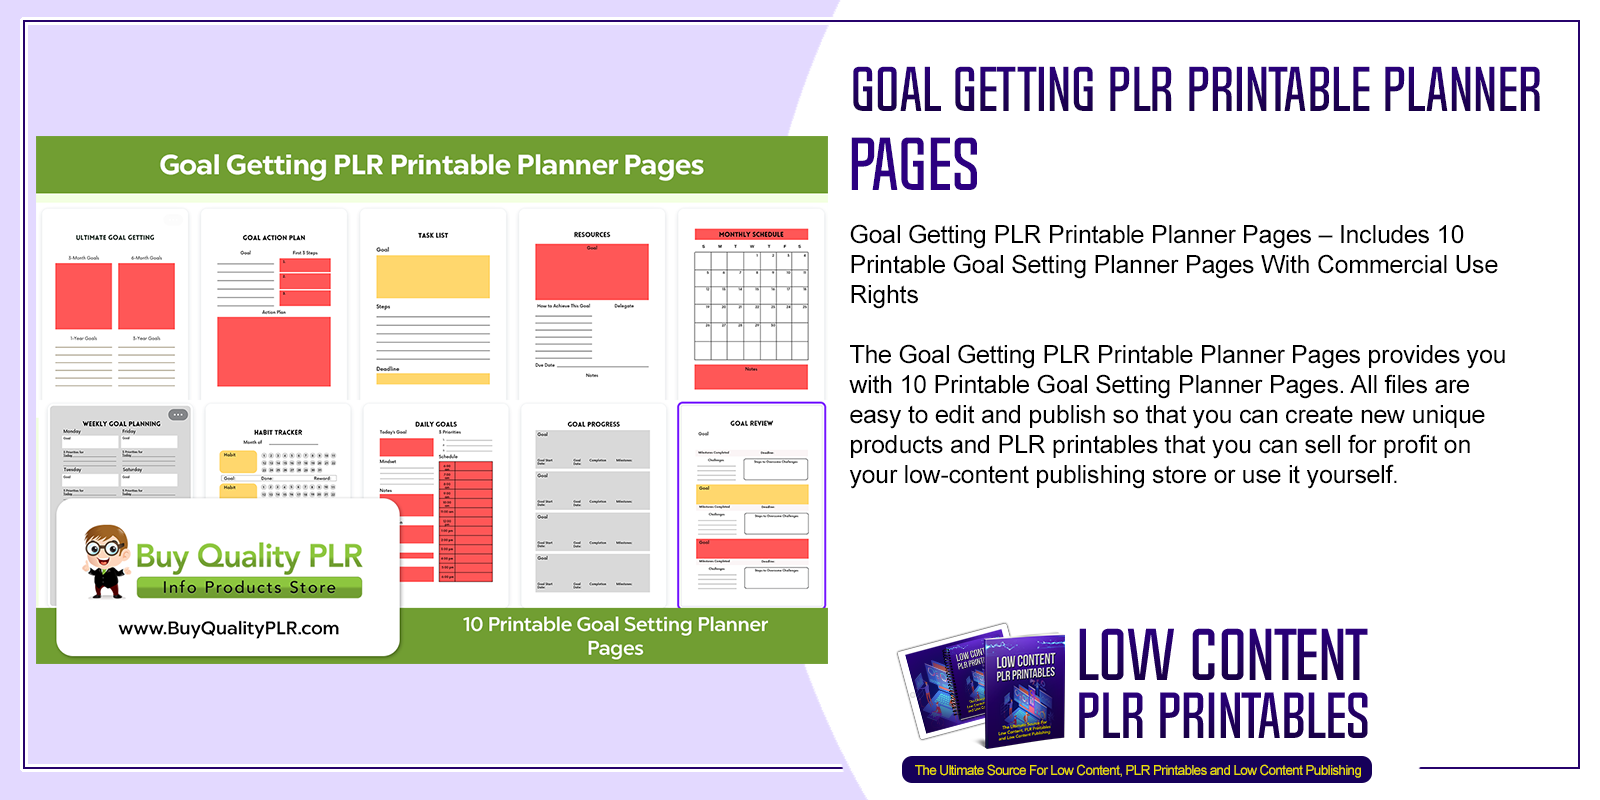 Goal Getting PLR Printable Planner Pages